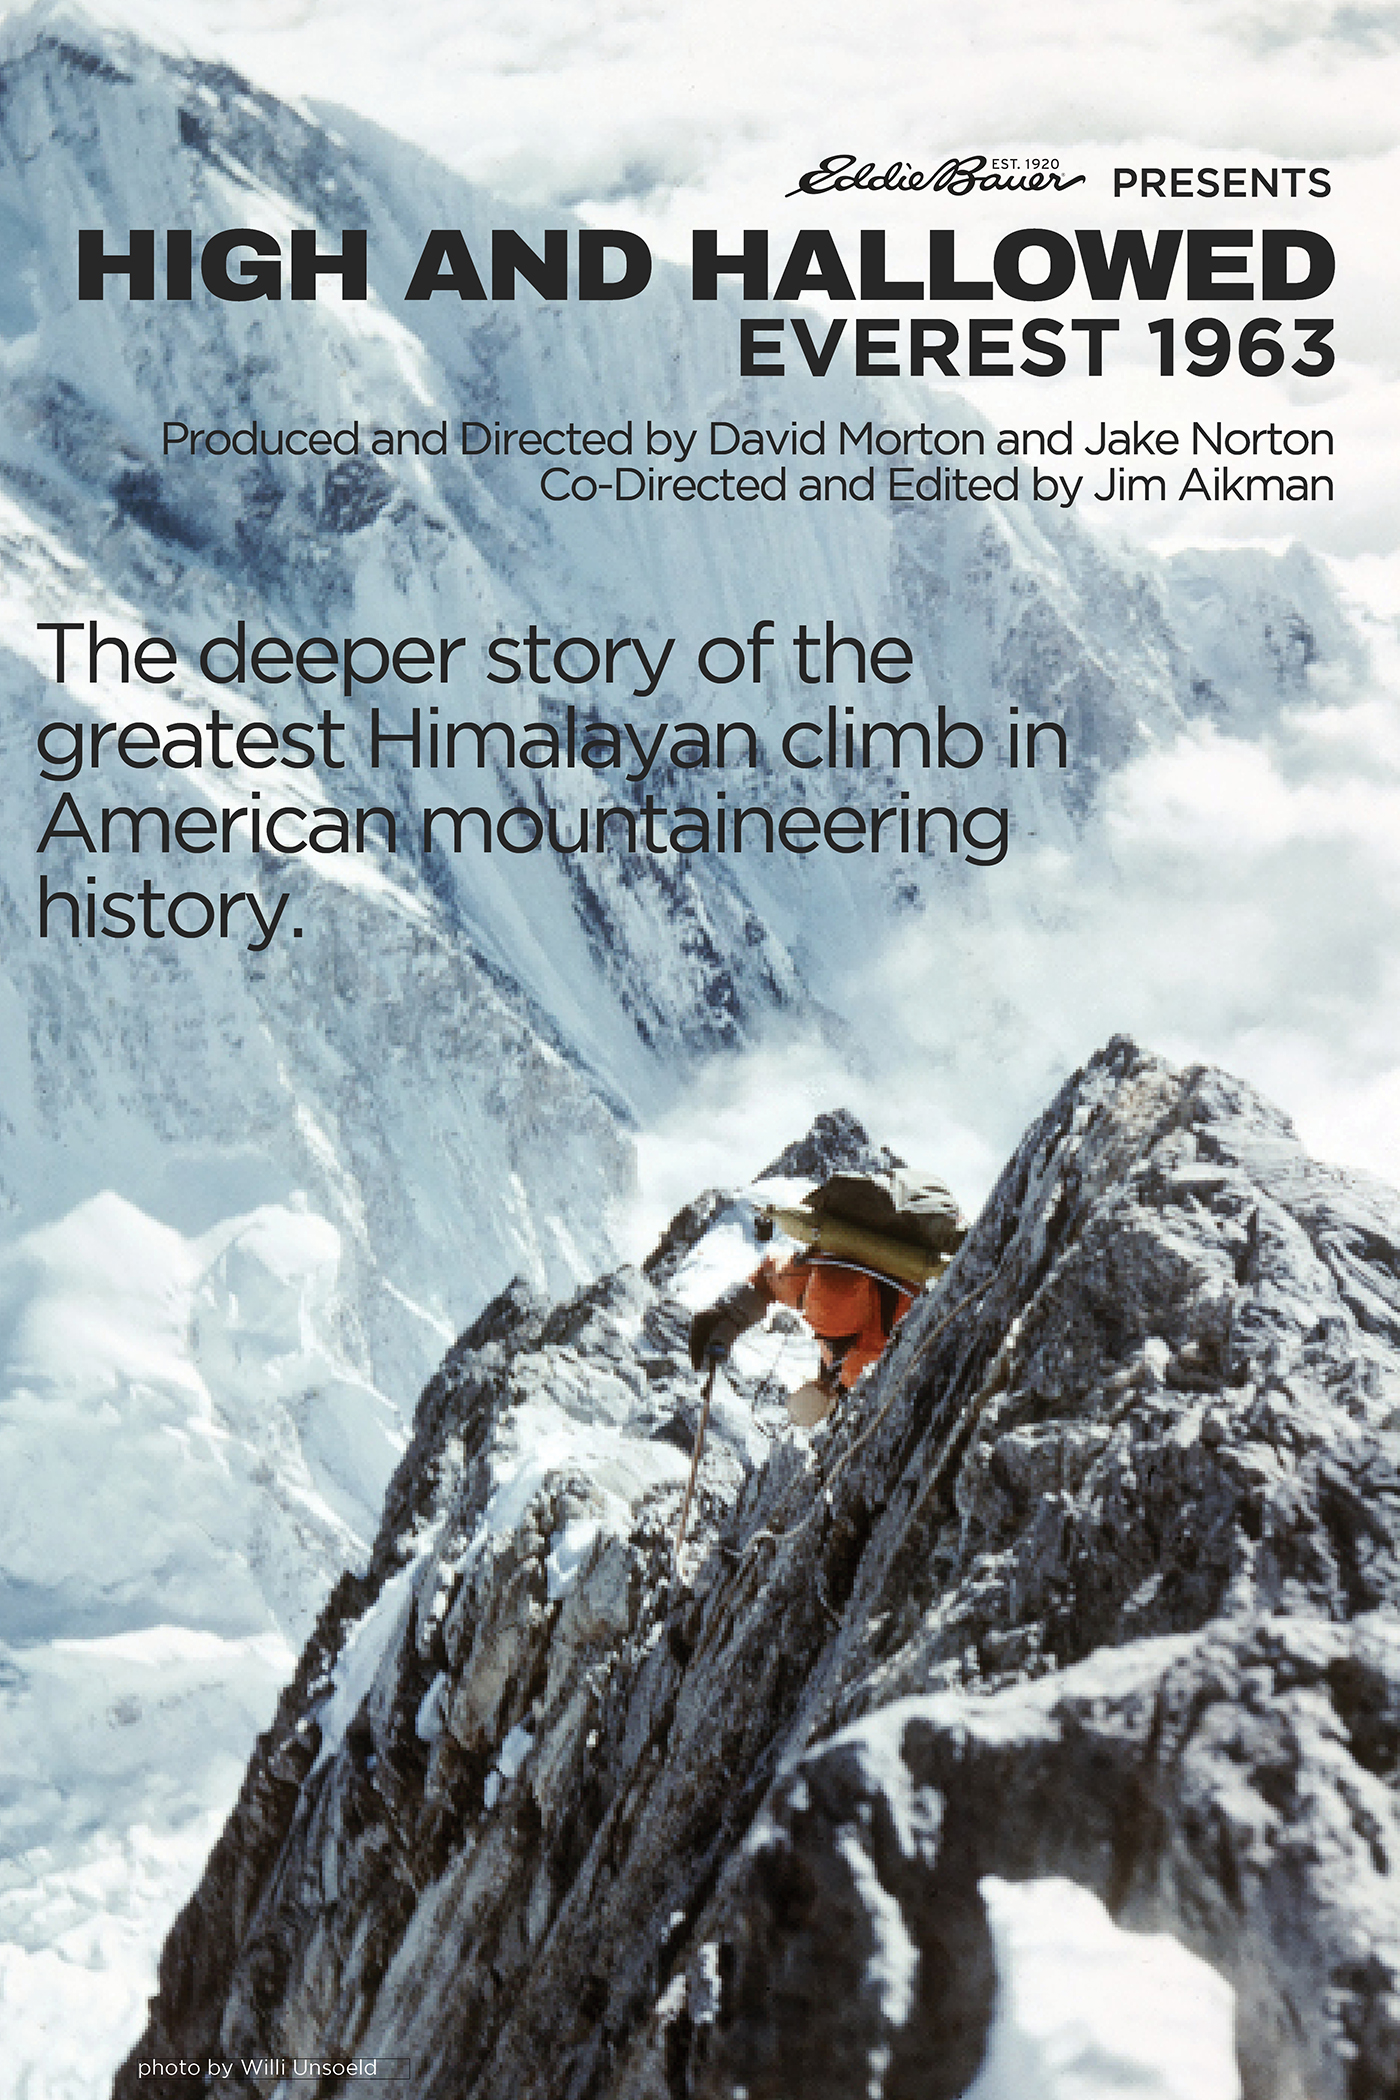 High and Hallowed: Everest 1963 (2013) starring Melissa Arnot on DVD on DVD